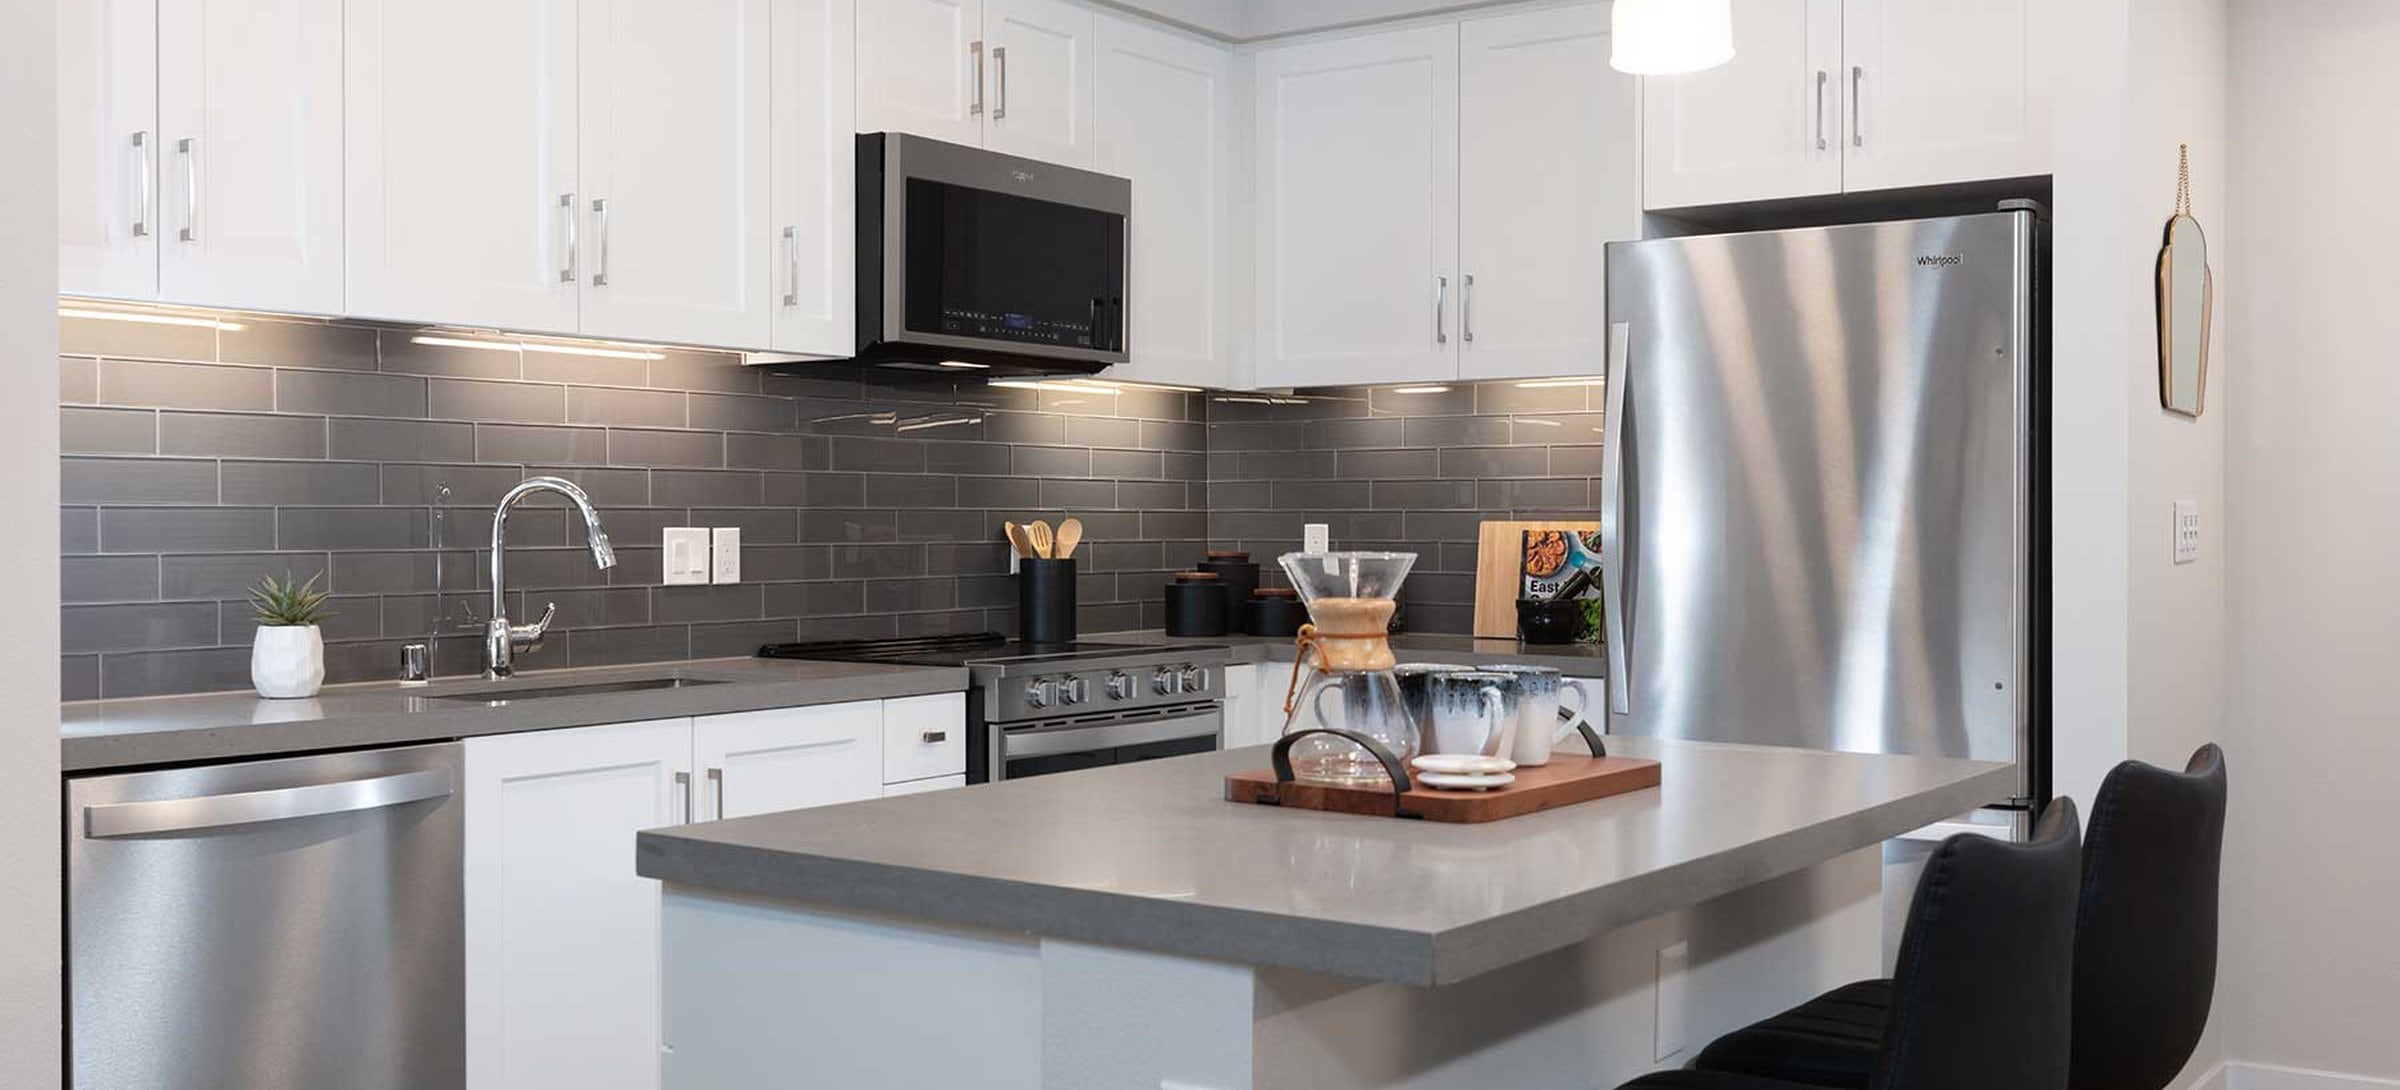 Upgrade Collection kitchen with stainless steel appliances, white cabinetry, grey quartz countertop, grey tile backsplash, and hard surface flooring